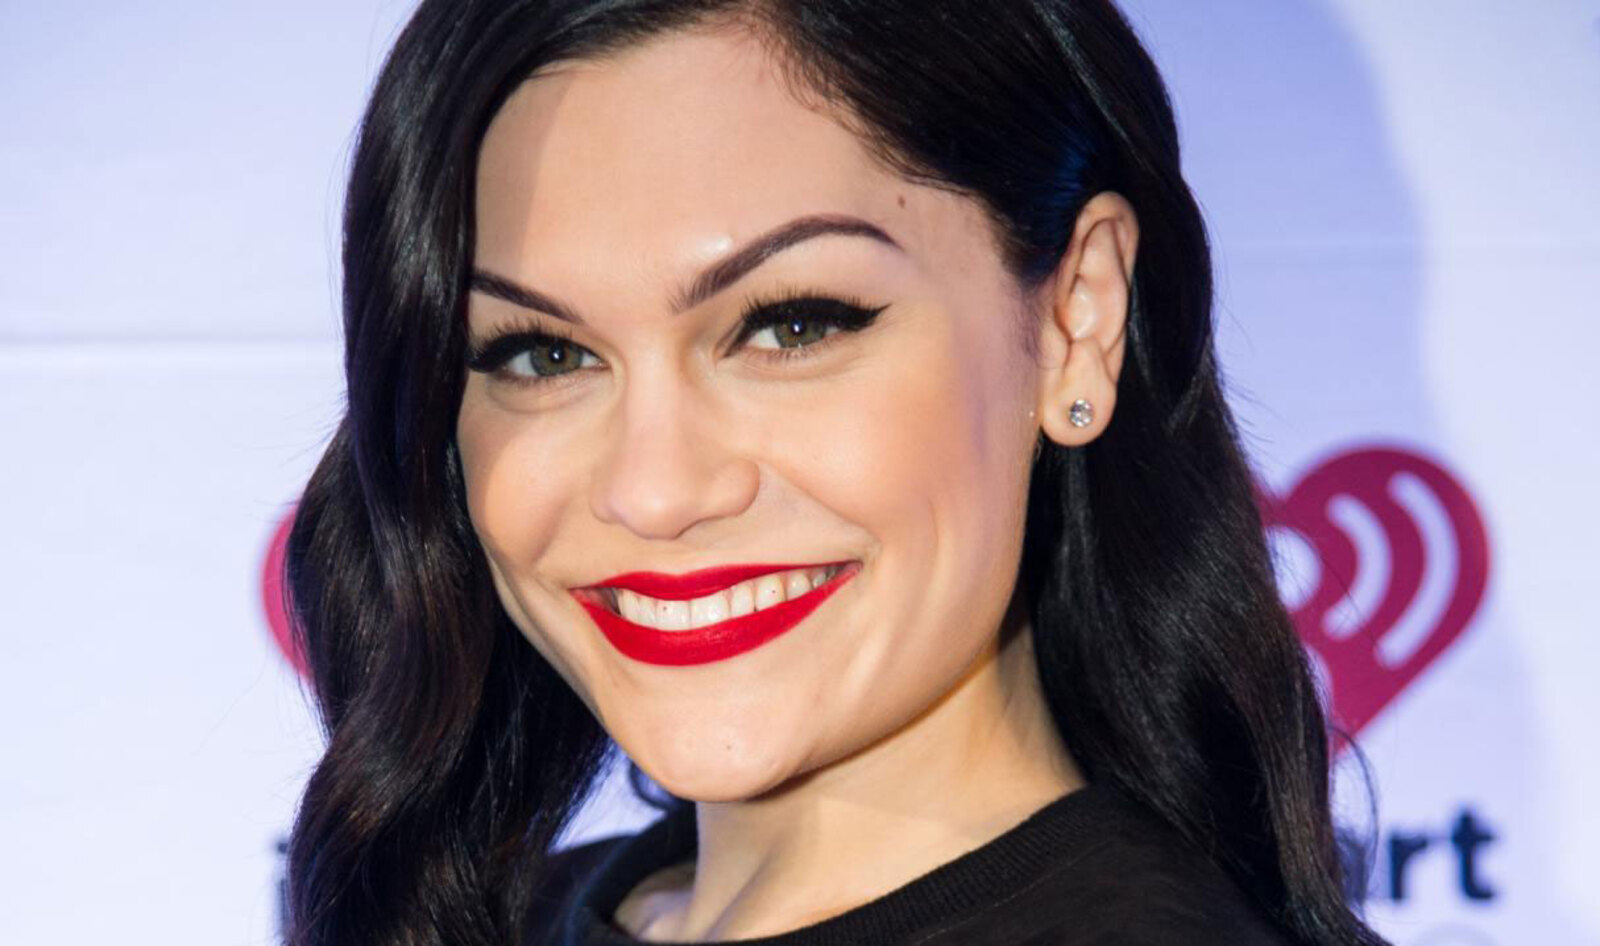 Jessie J Takes to The Lateish Show With Vegan Rendition of “Old MacDonald Had a Farm”